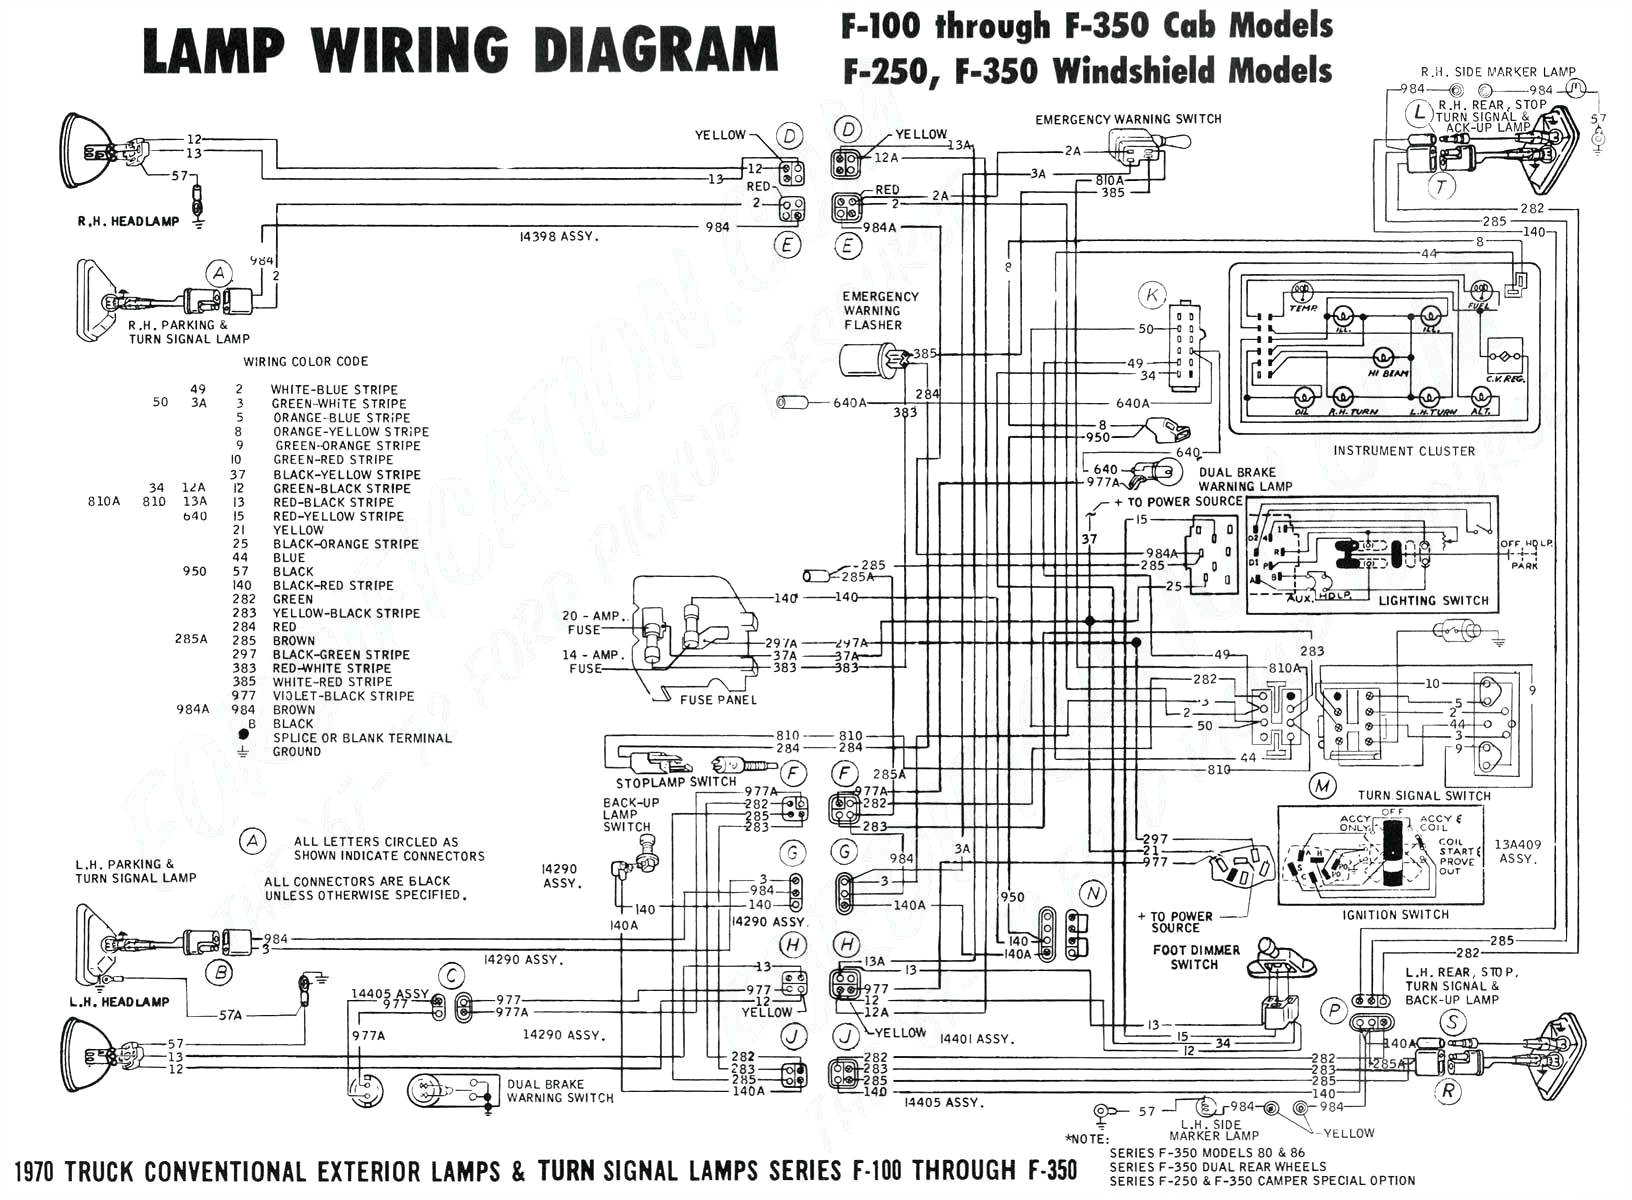 1989 s10 engine diagram wiring diagram review